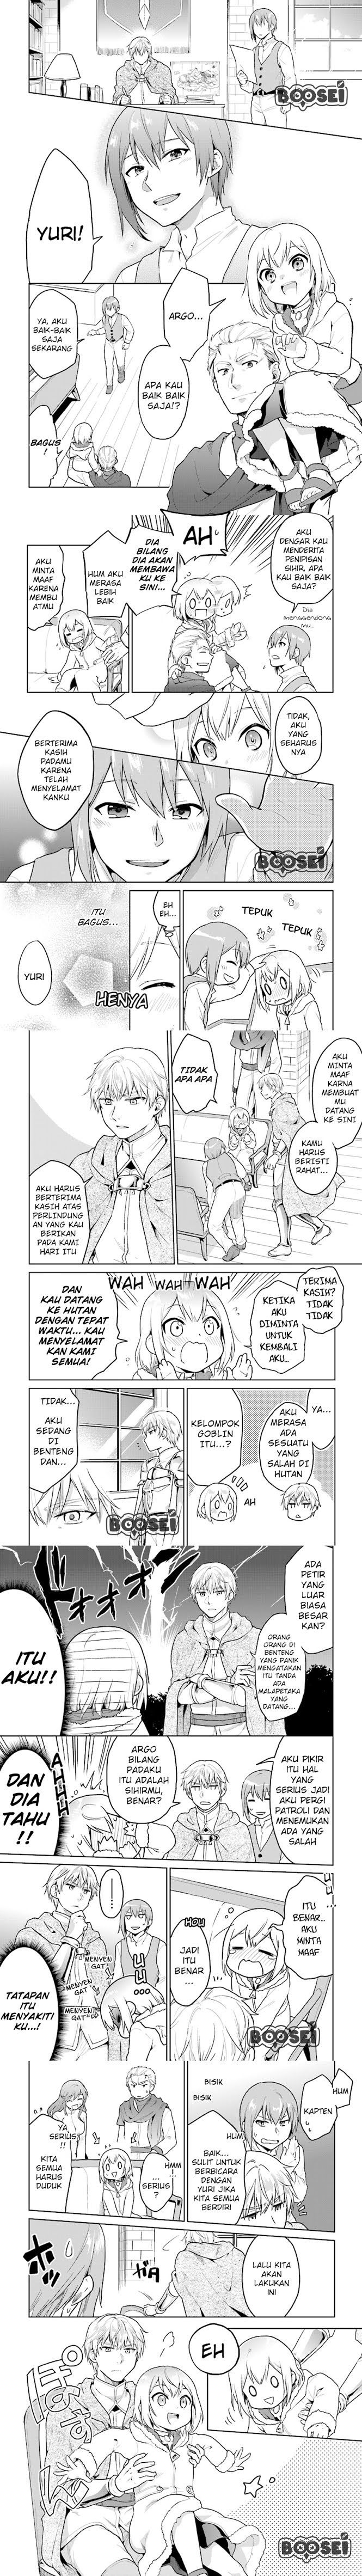 Dilarang COPAS - situs resmi www.mangacanblog.com - Komik the small sage will try her best in the different world from lv 1 007 - chapter 7 8 Indonesia the small sage will try her best in the different world from lv 1 007 - chapter 7 Terbaru 2|Baca Manga Komik Indonesia|Mangacan